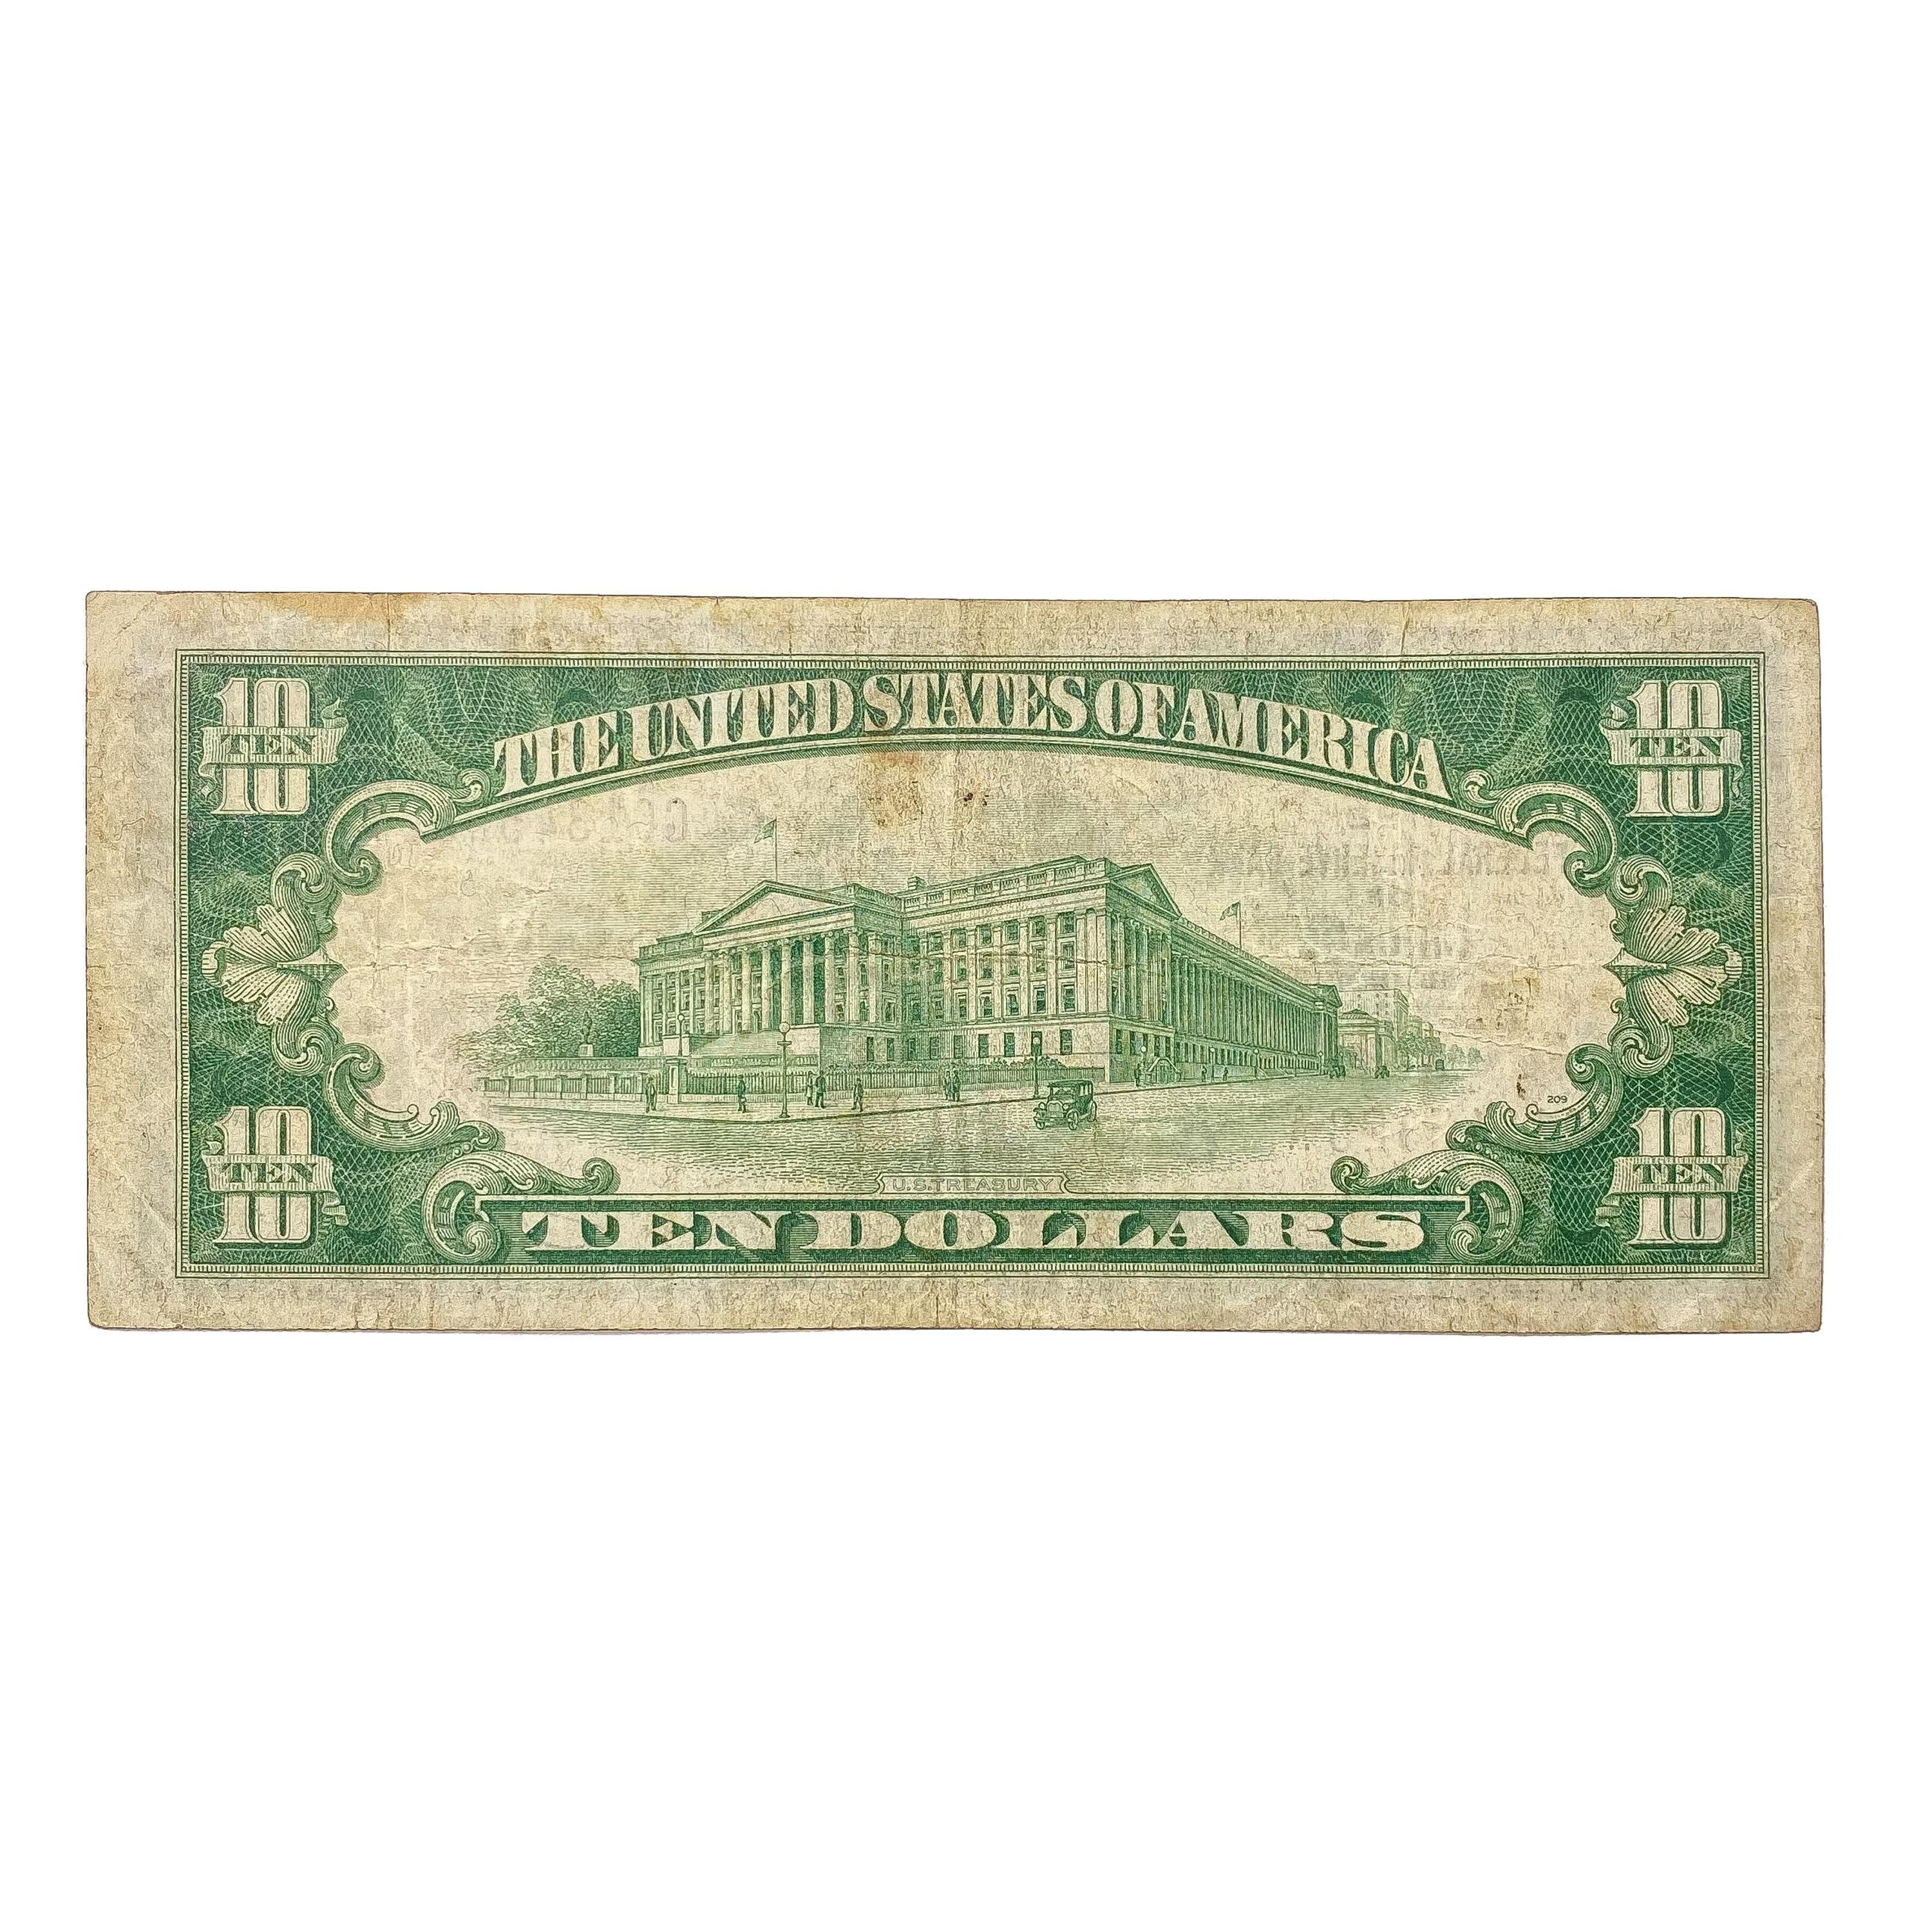 1929 G $10 US Bank of Chicago, IL Fed Res Note